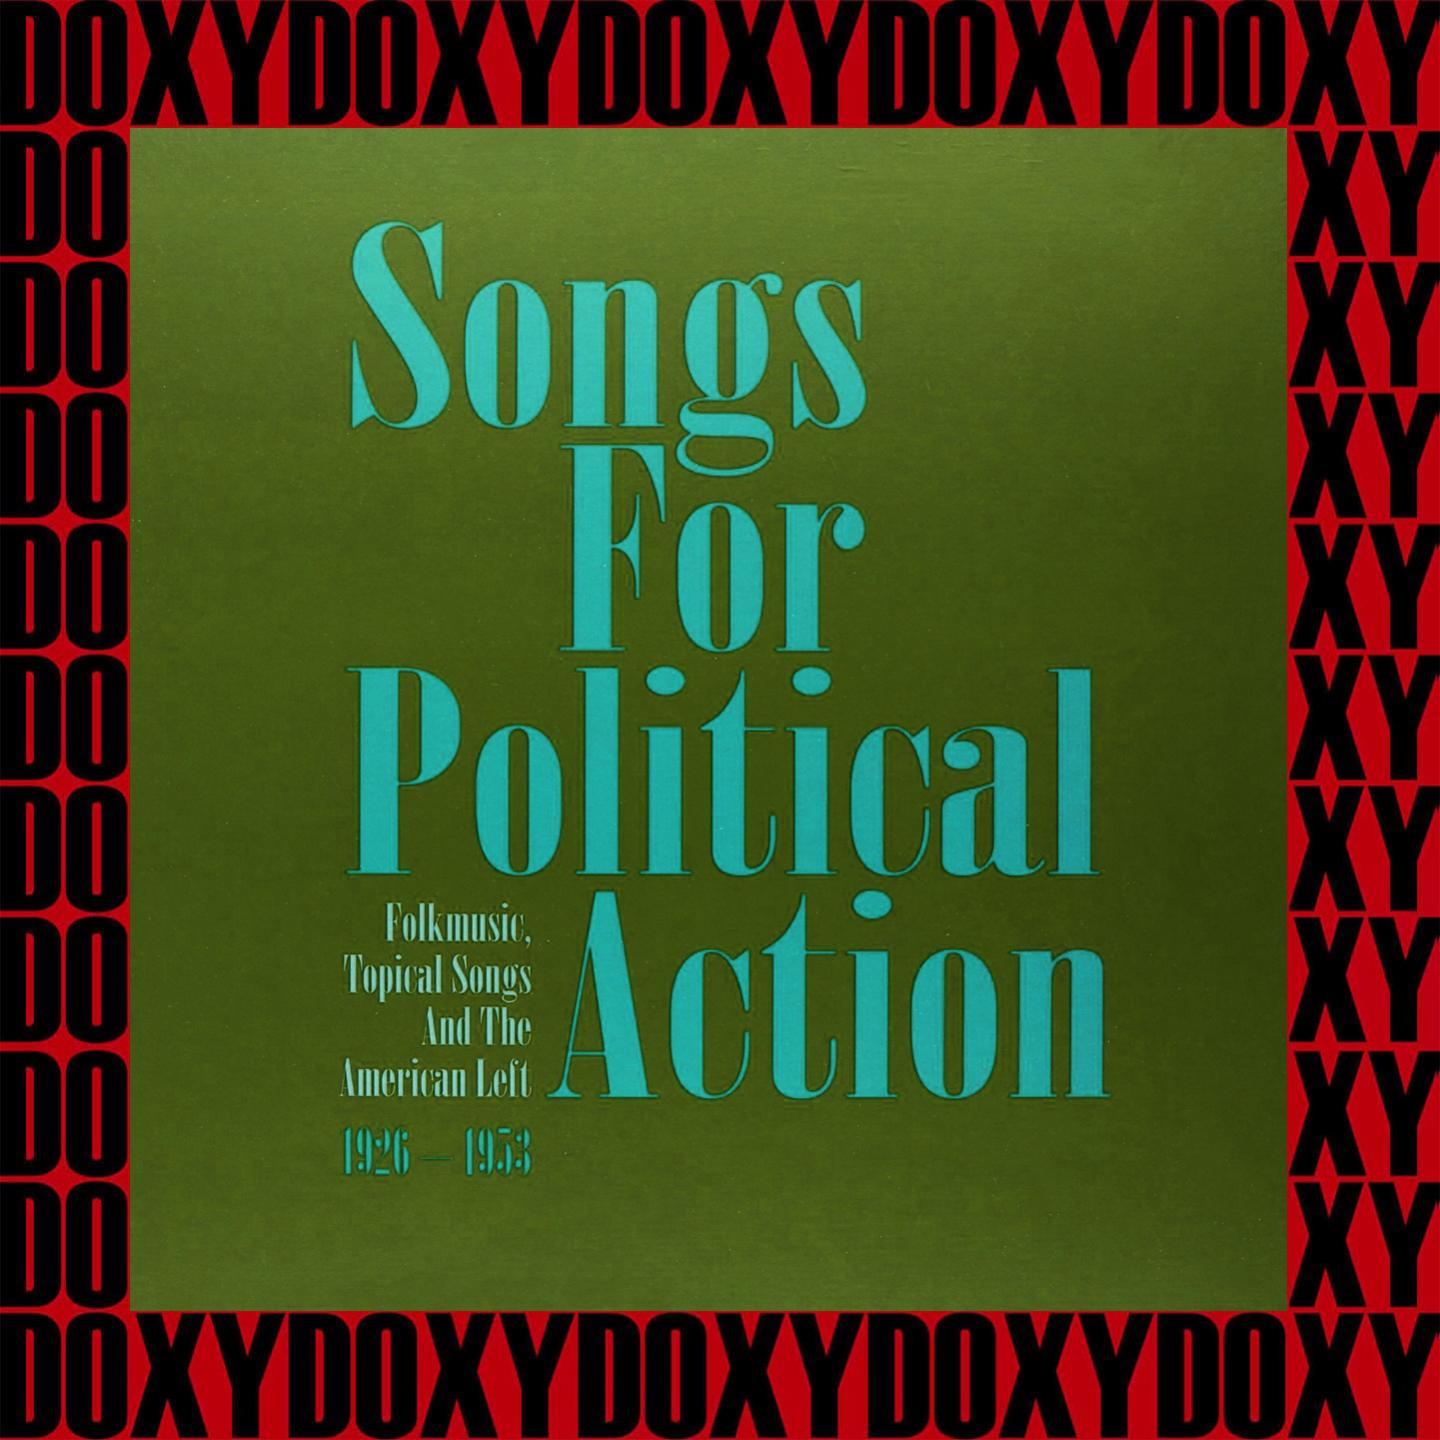 Songs for Political Action, Campaign Songs, 1944-1949 (Remastered Version) (Doxy Collection)